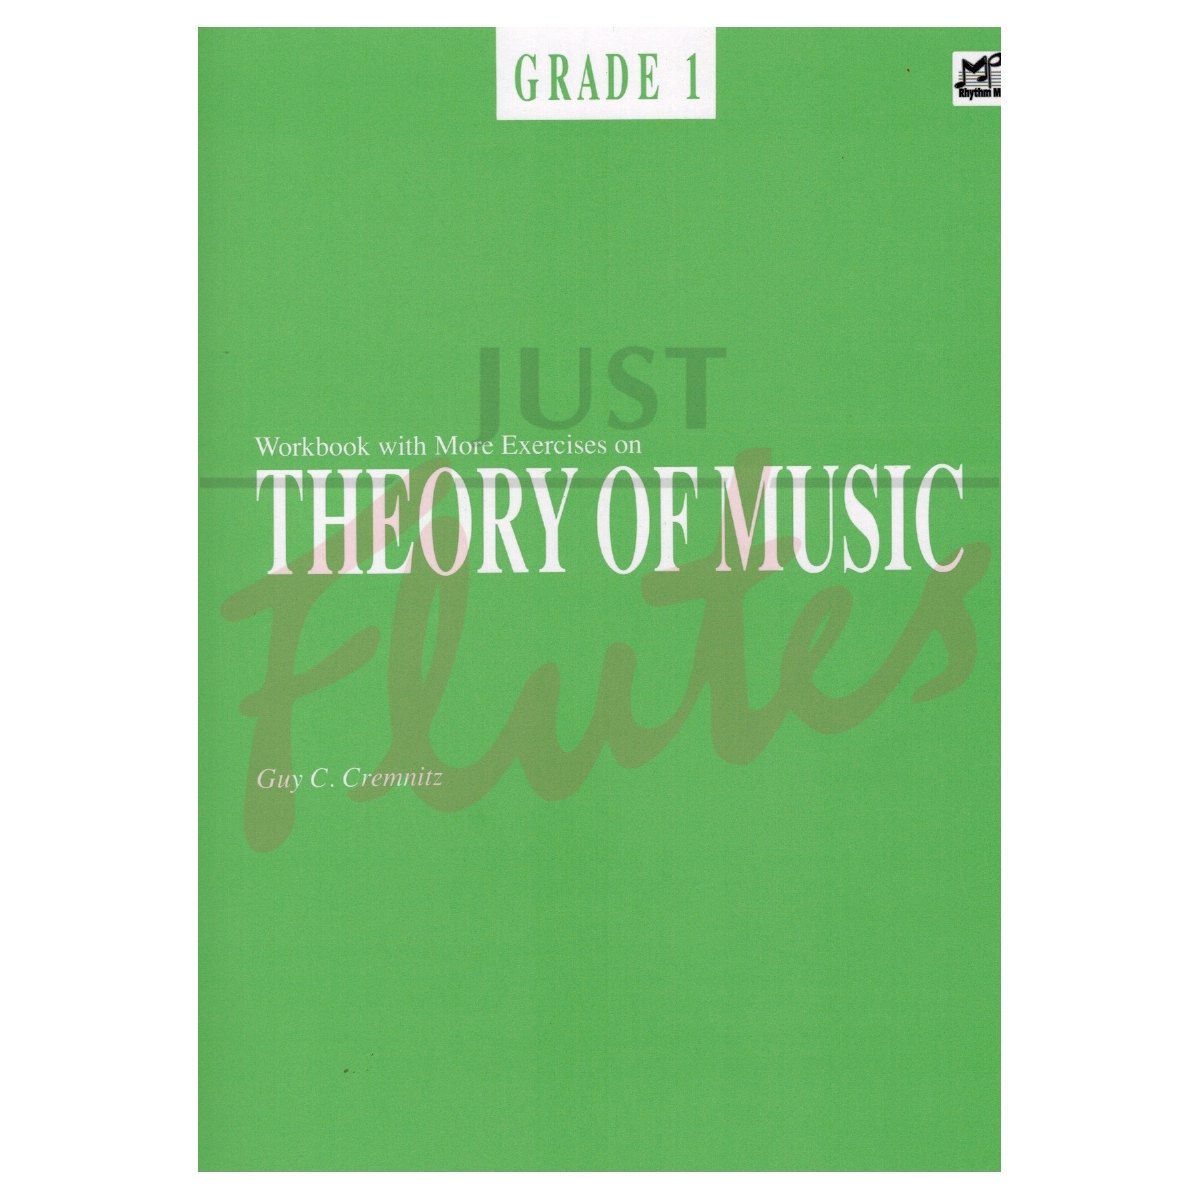 Workbook with More Exercises on Theory of Music Grade 1